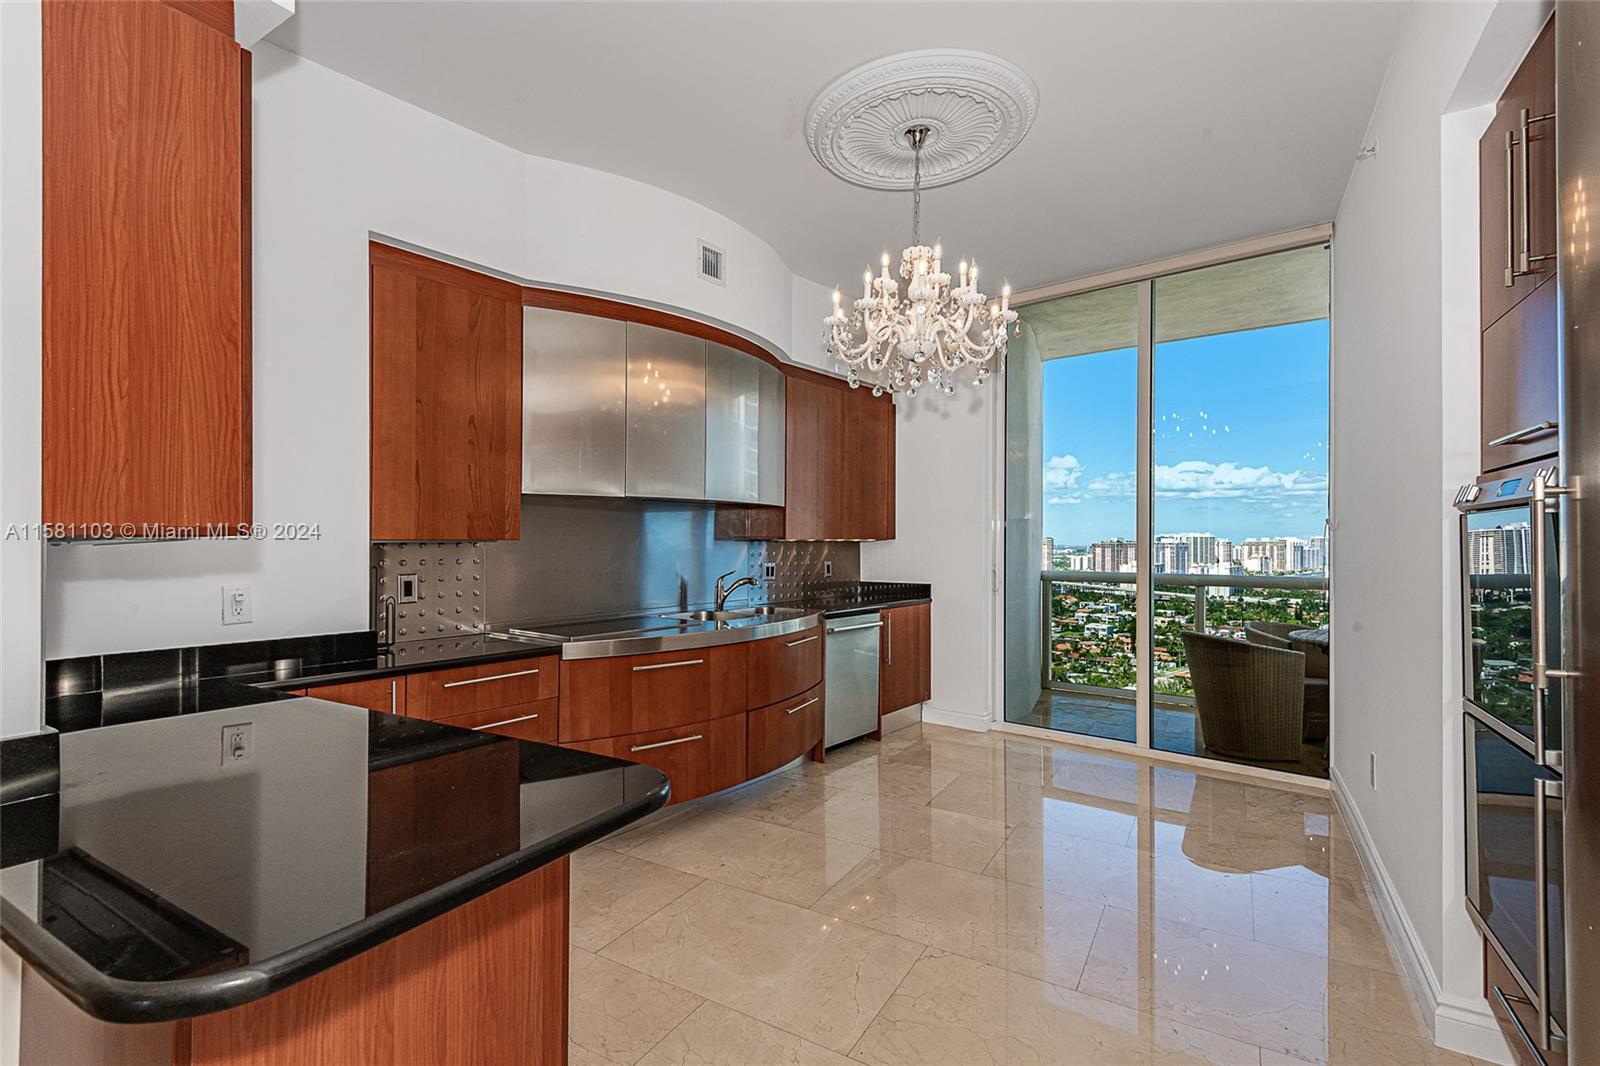 18101 Collins Ave  2 167 Sq Ft   Ave 3802, Sunny Isles Beach, Miami-Dade County, Florida - 3 Bedrooms  
4 Bathrooms - 